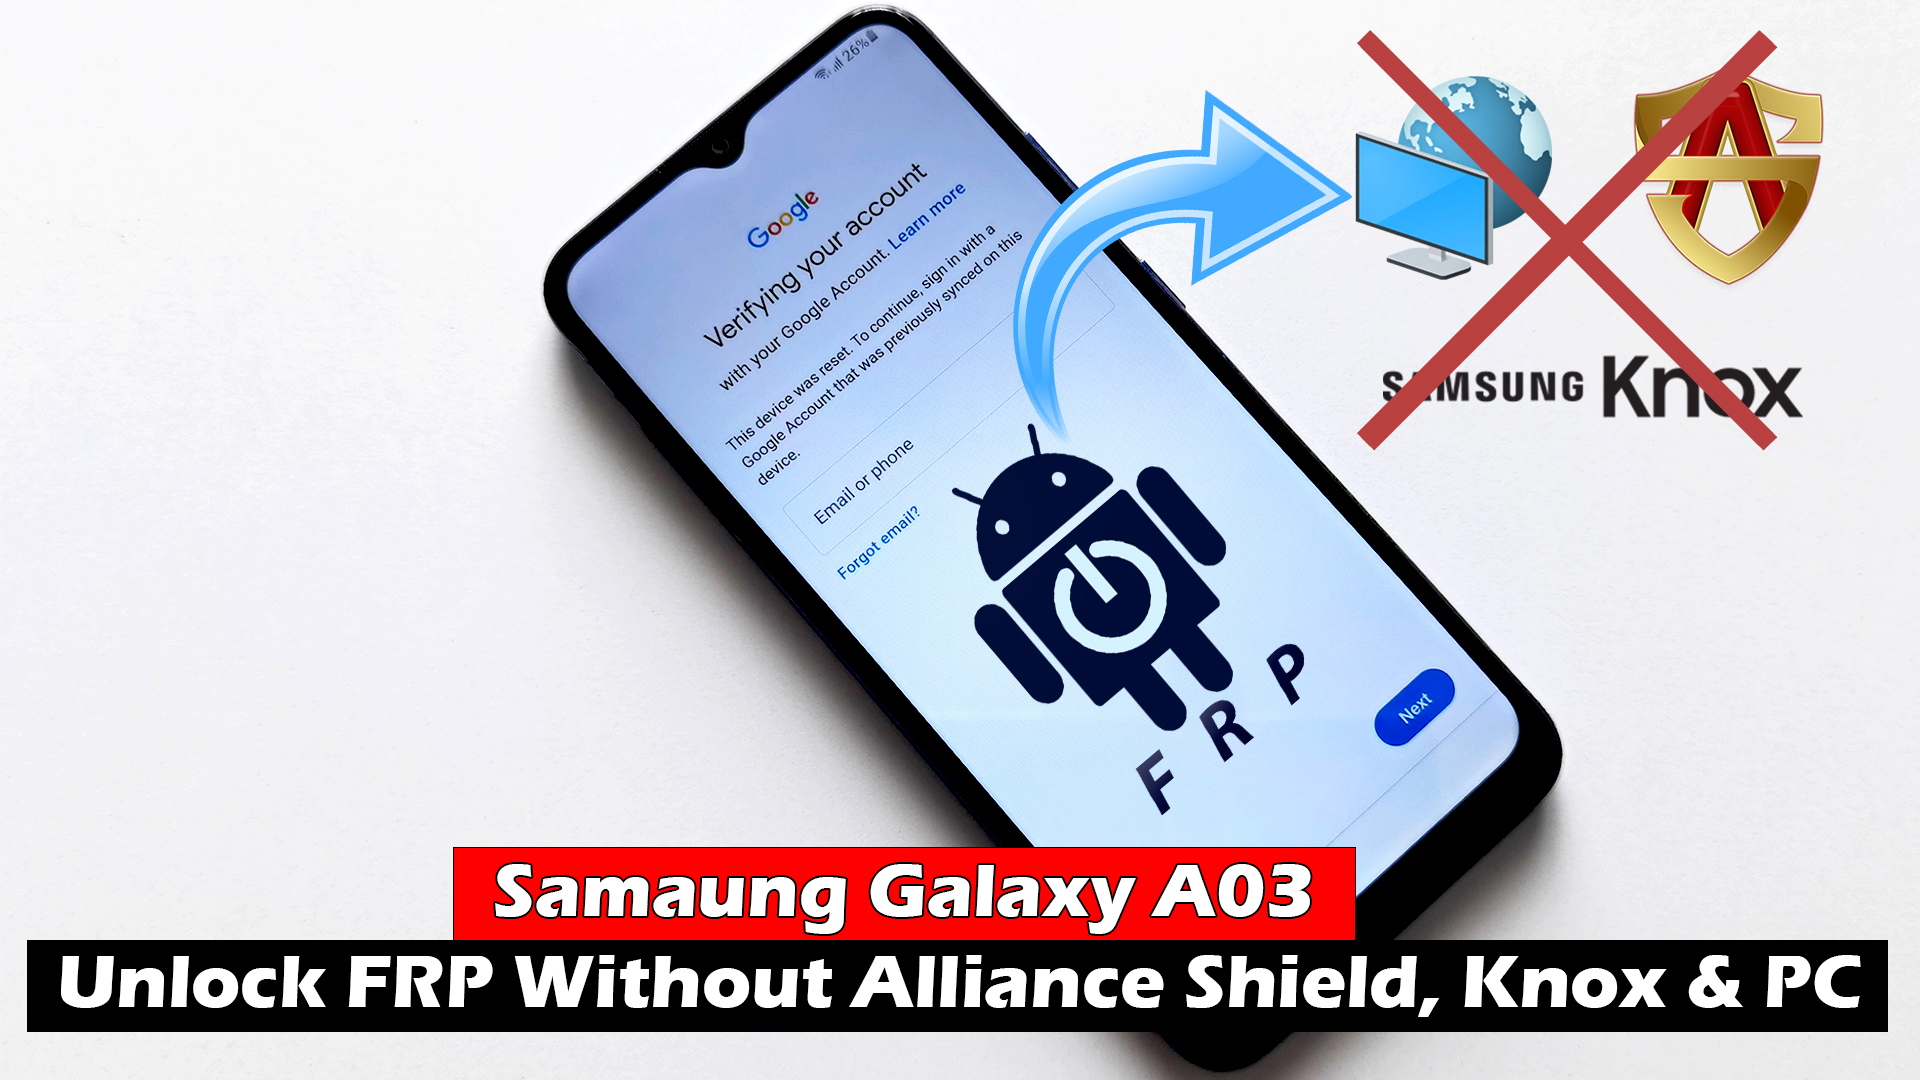 Alliance Shield X Not Working, Samsung Android 11 FRP